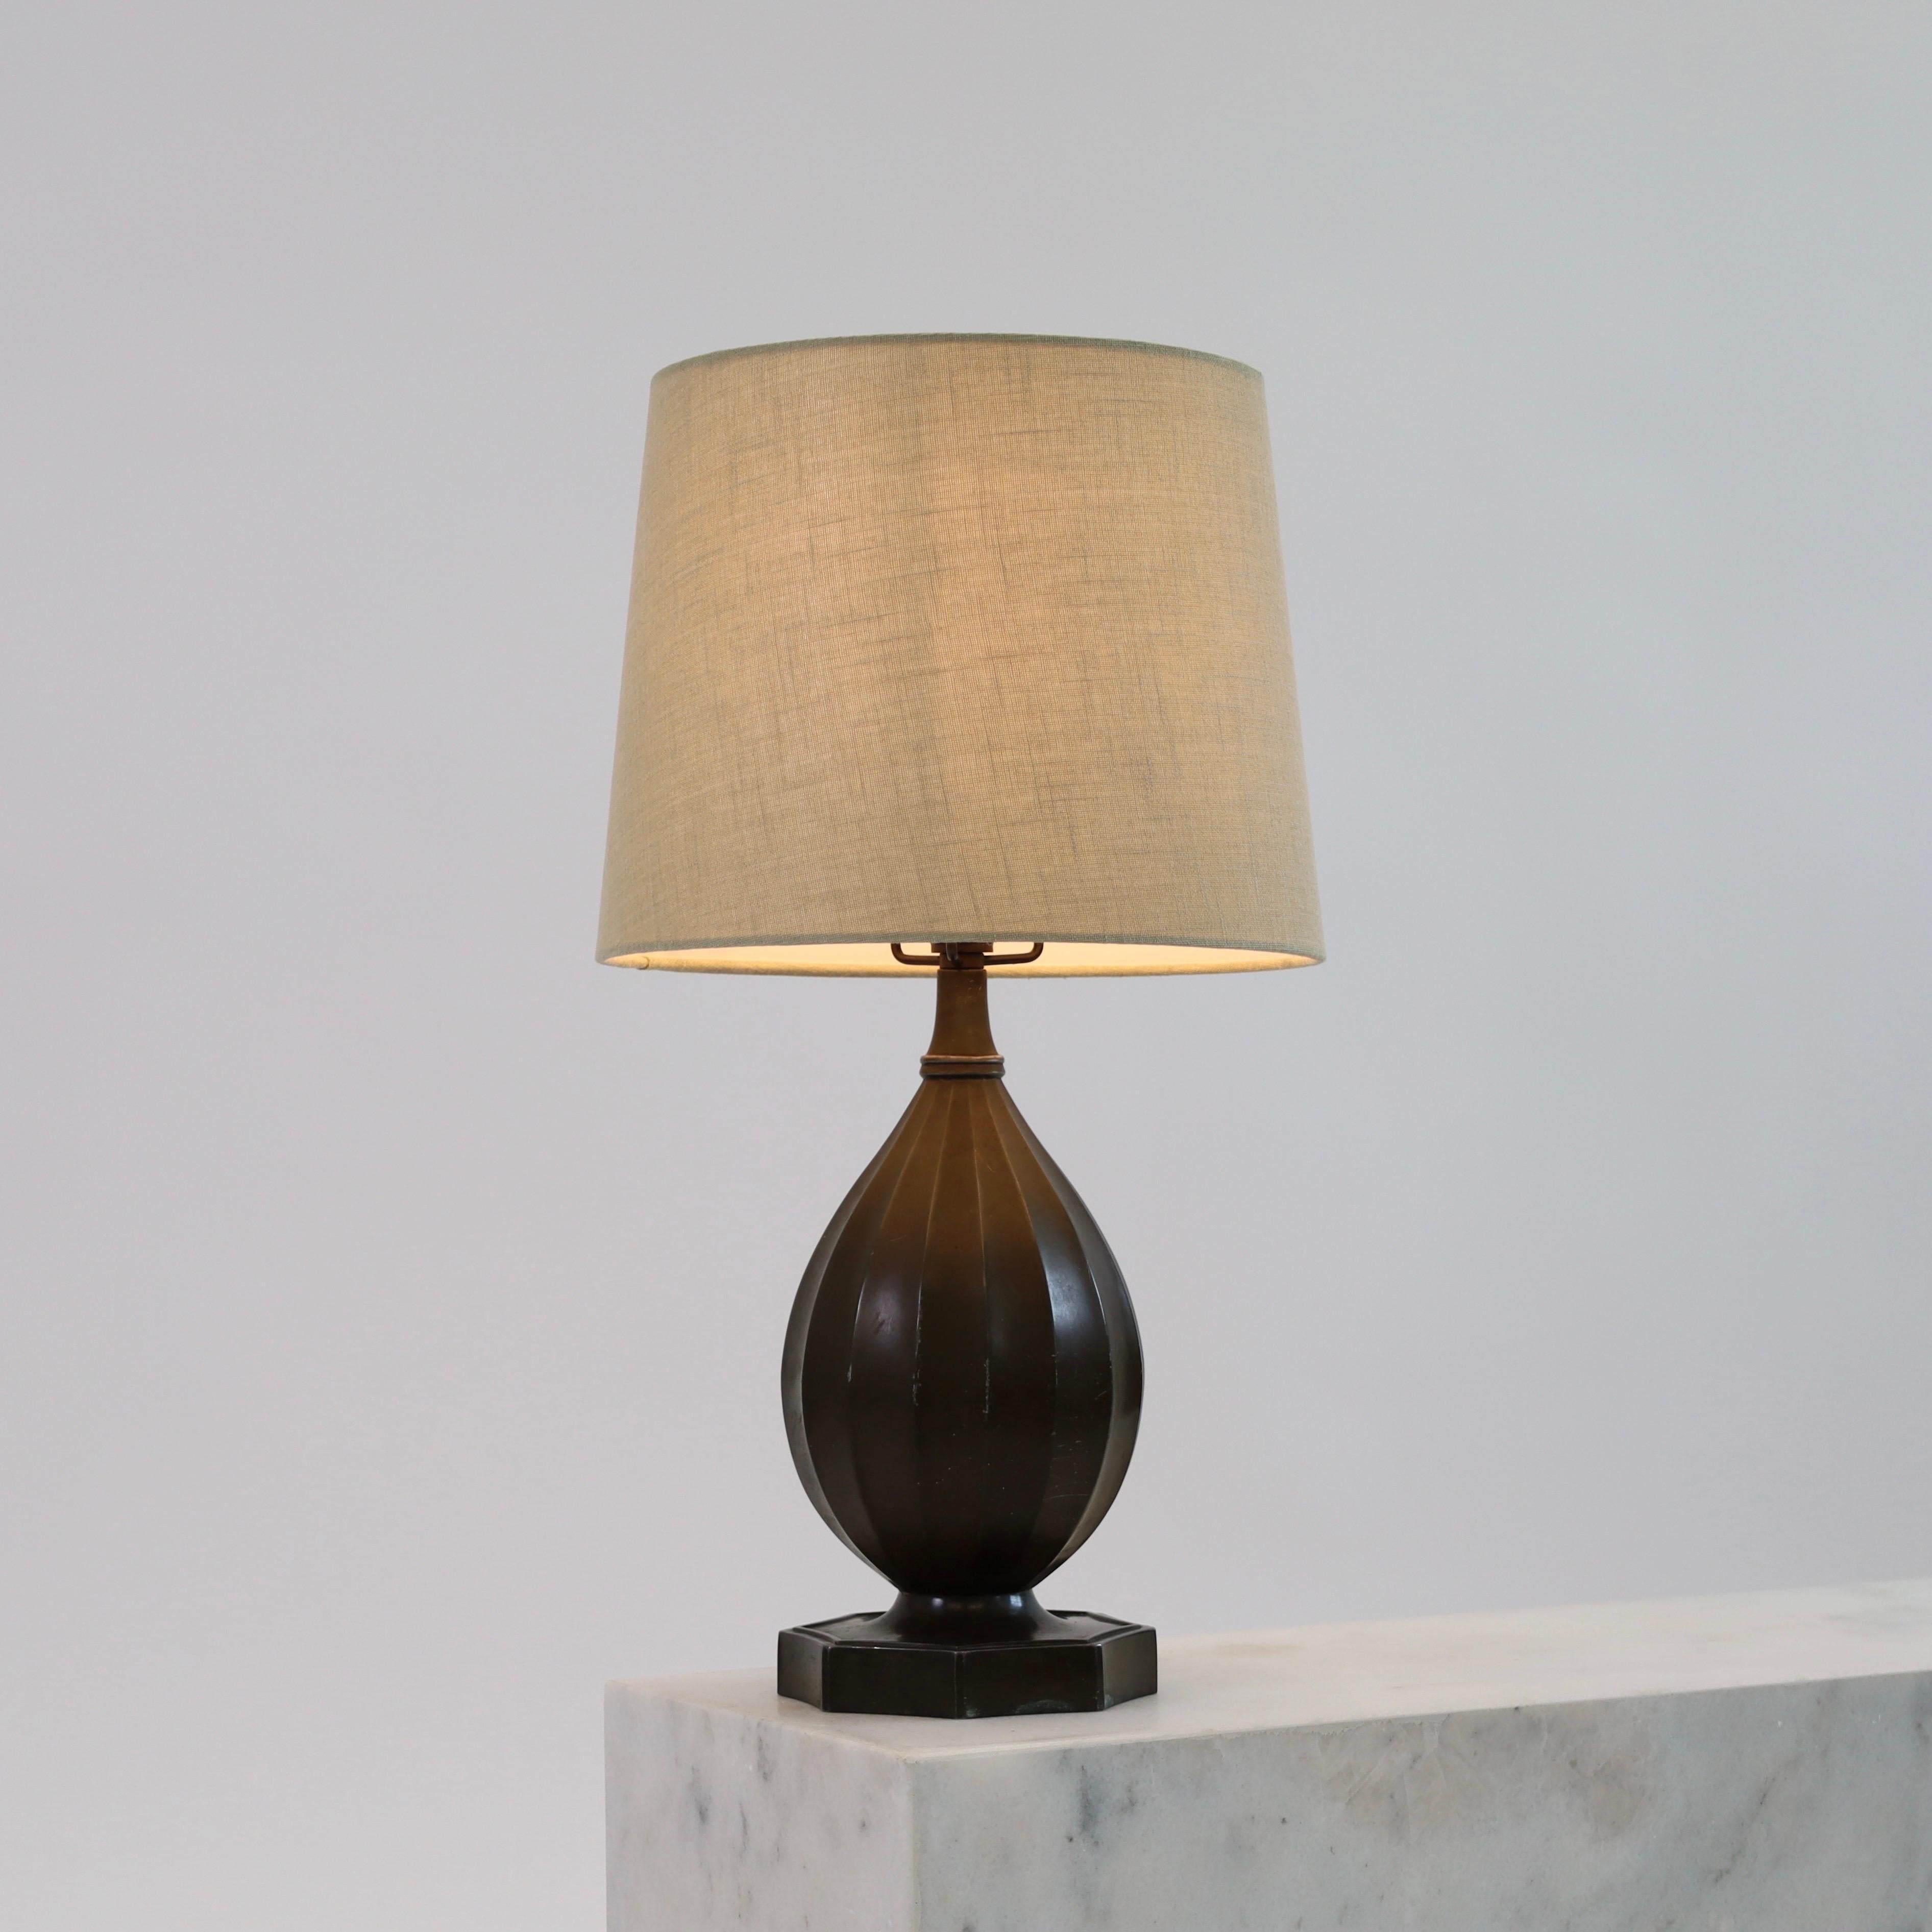 A timeless table lamp by Just Andersen in 1936. A center piece for a beautiful home.  

* Bottle-shaped metal desk lamp with vertical lines and a beige fabric shade.
* Designer: Just Andersen
* Model: 1860 
* Year: 1936
* Condition: Good vintage